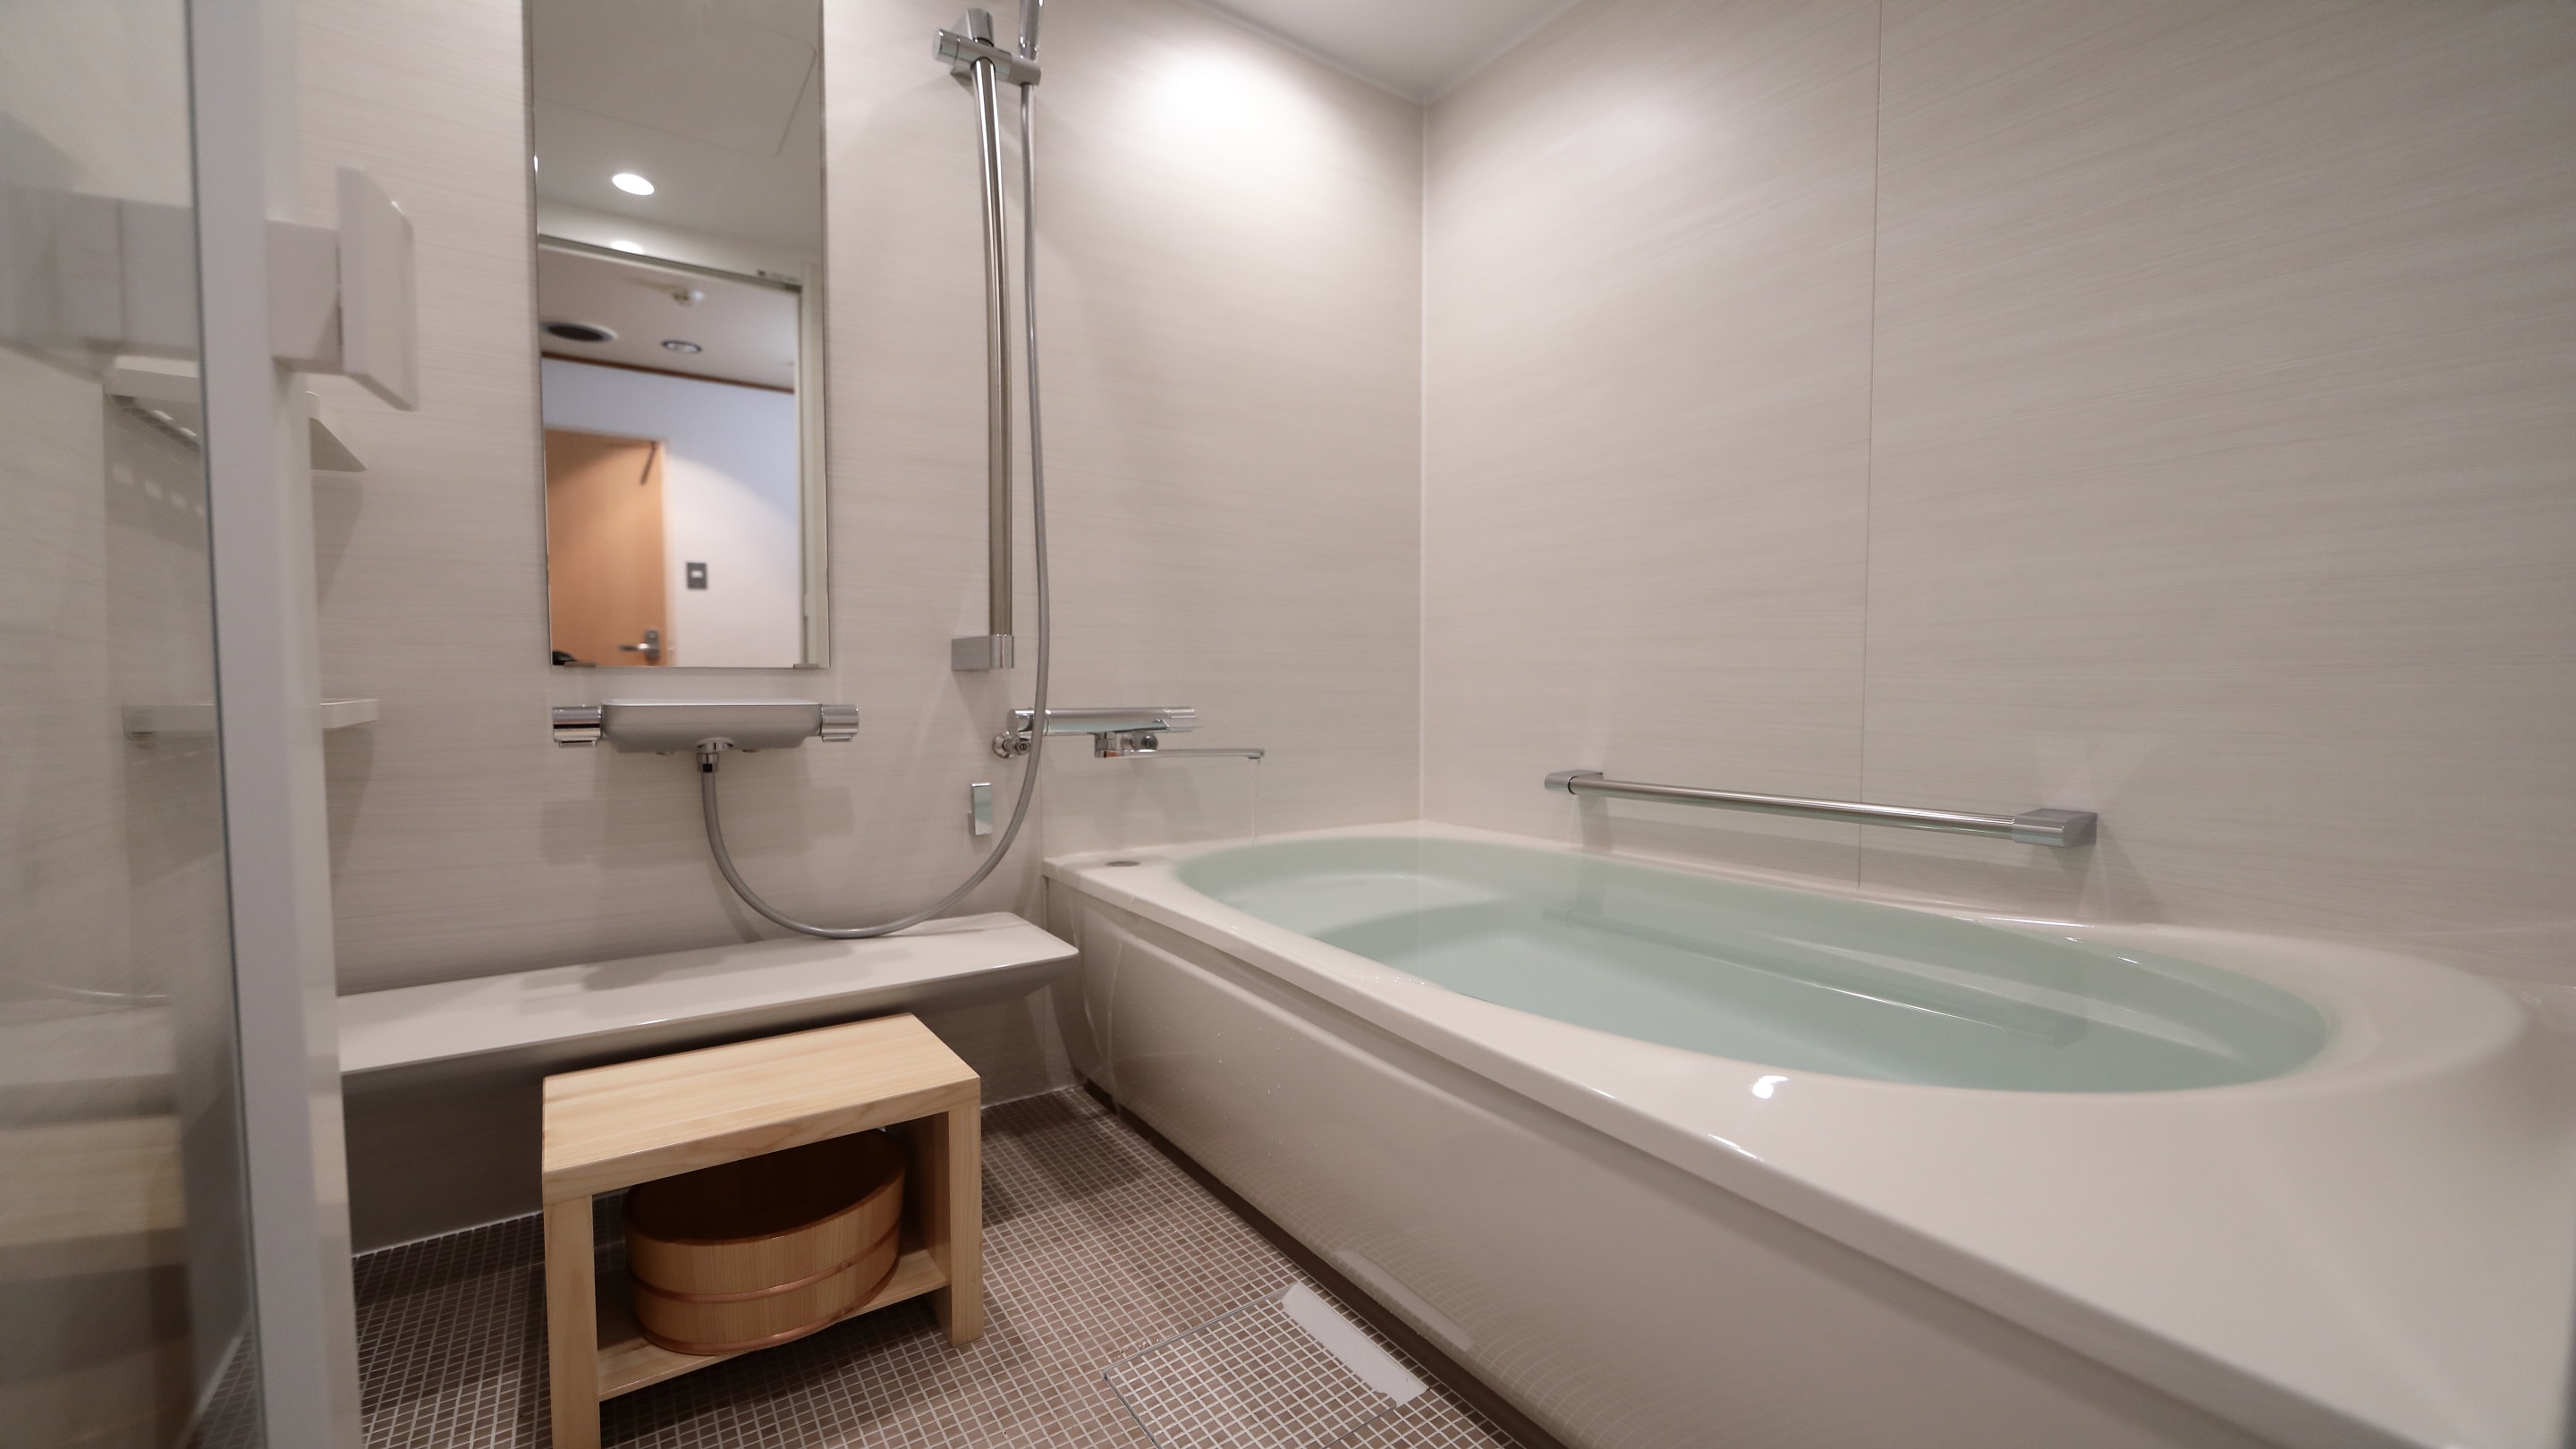 2024.3 Renovation: An example of an indoor bath with hot spring water supply